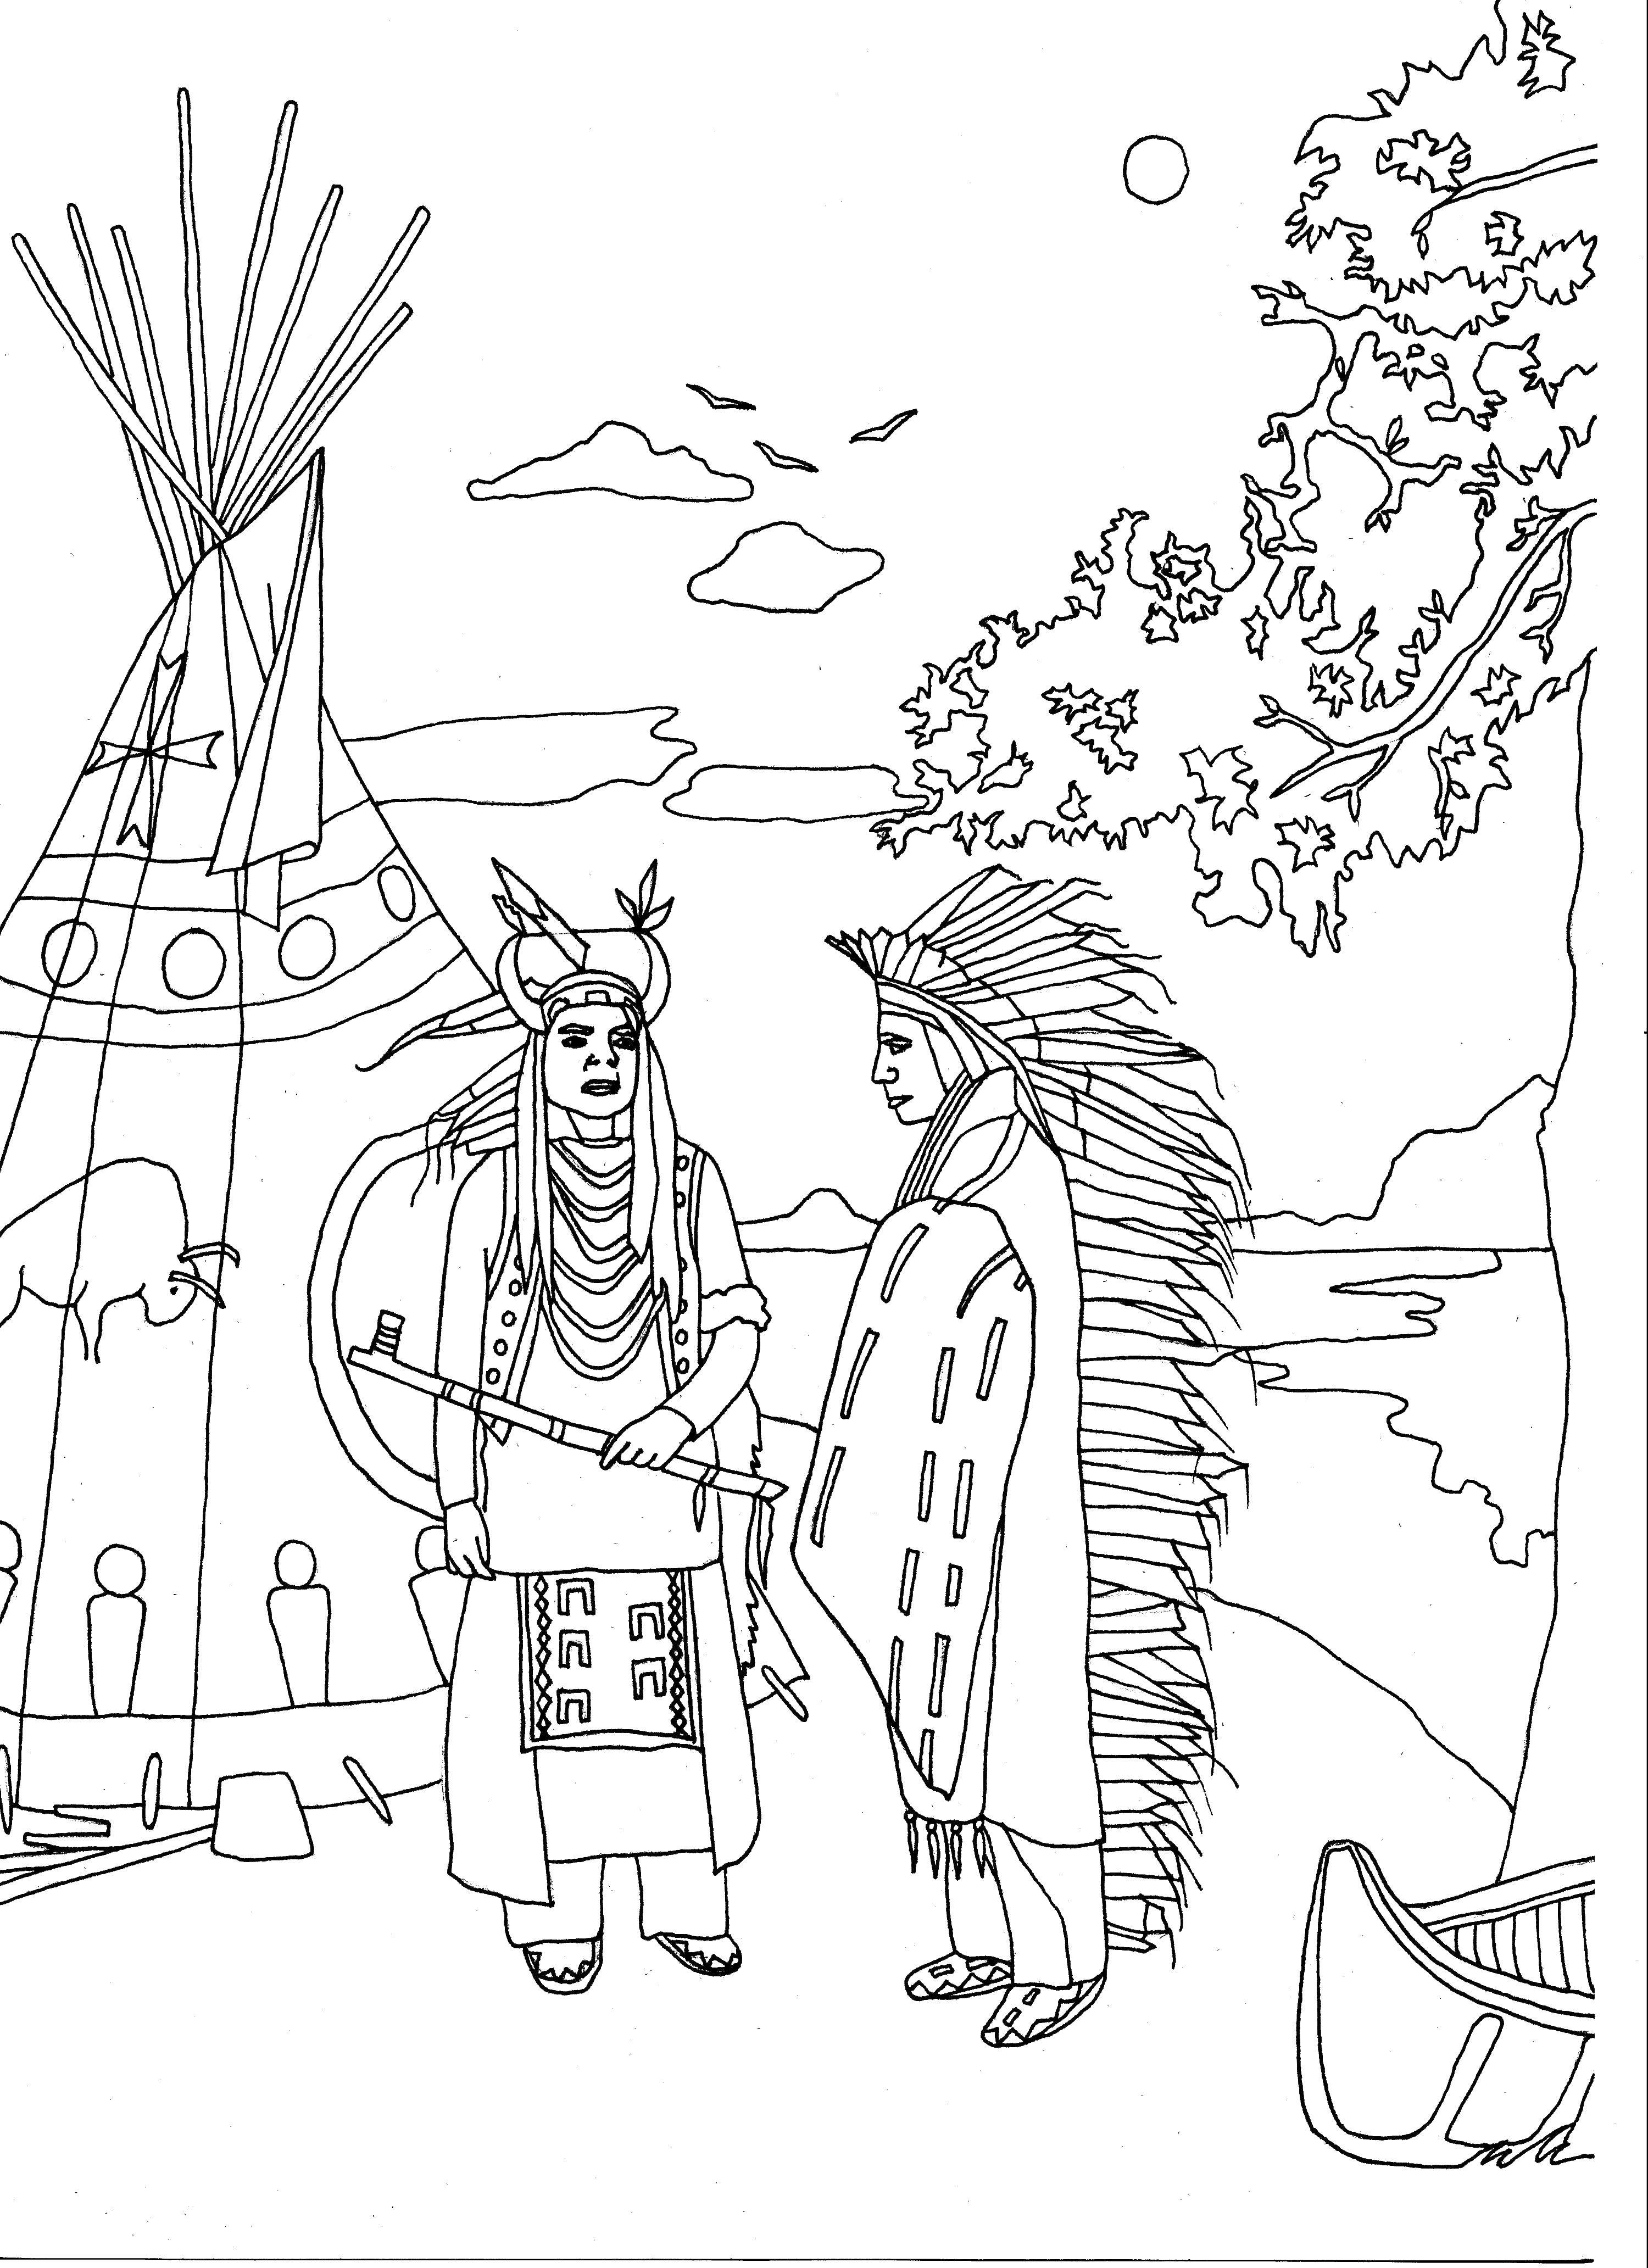 Coloring The Indians. Category The Indians. Tags:  the Indians.